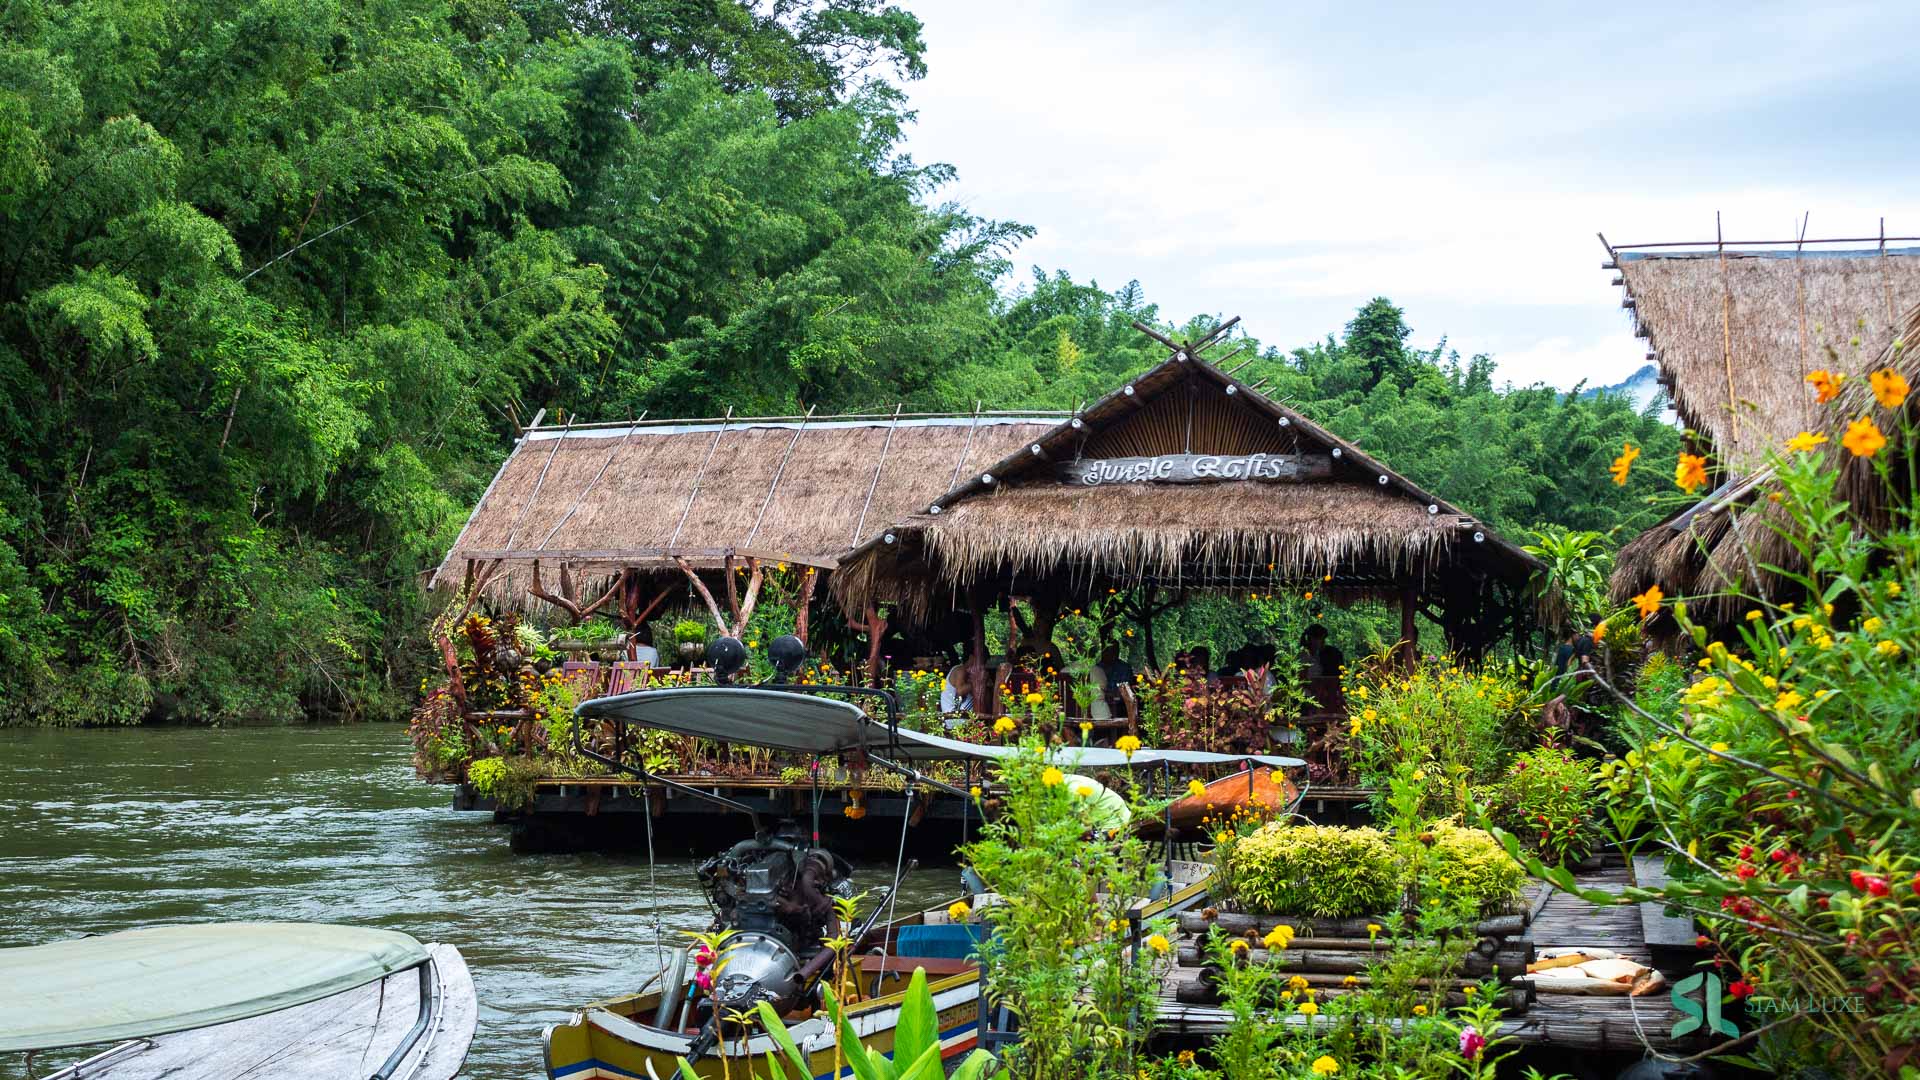 The most relaxing trip in Jungle Rafts along the River Kwai in Kanchanaburi province